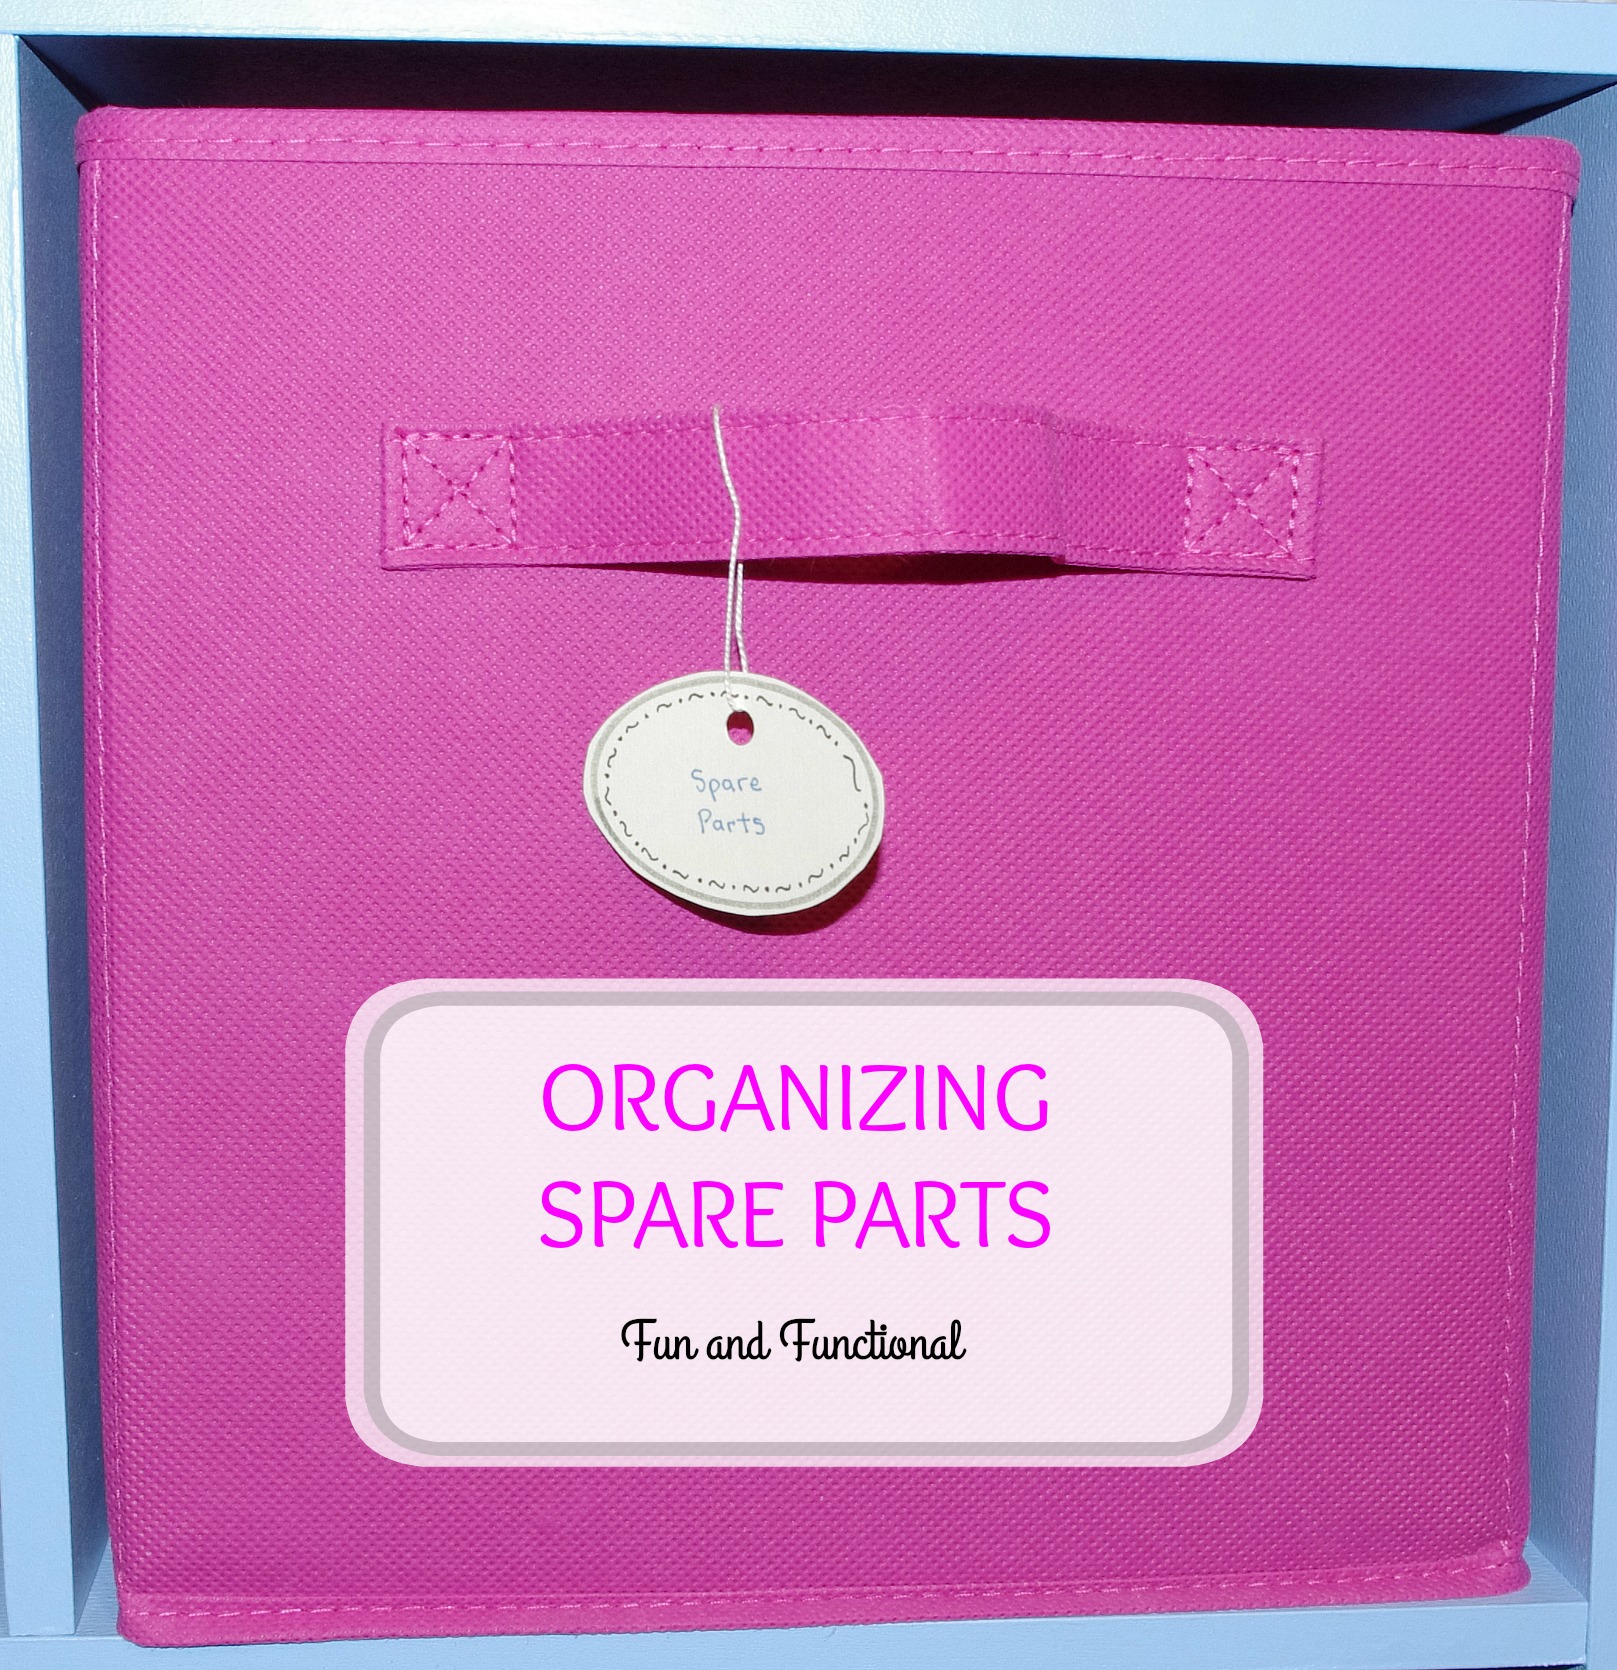 Organize spare parts to simplify your life.